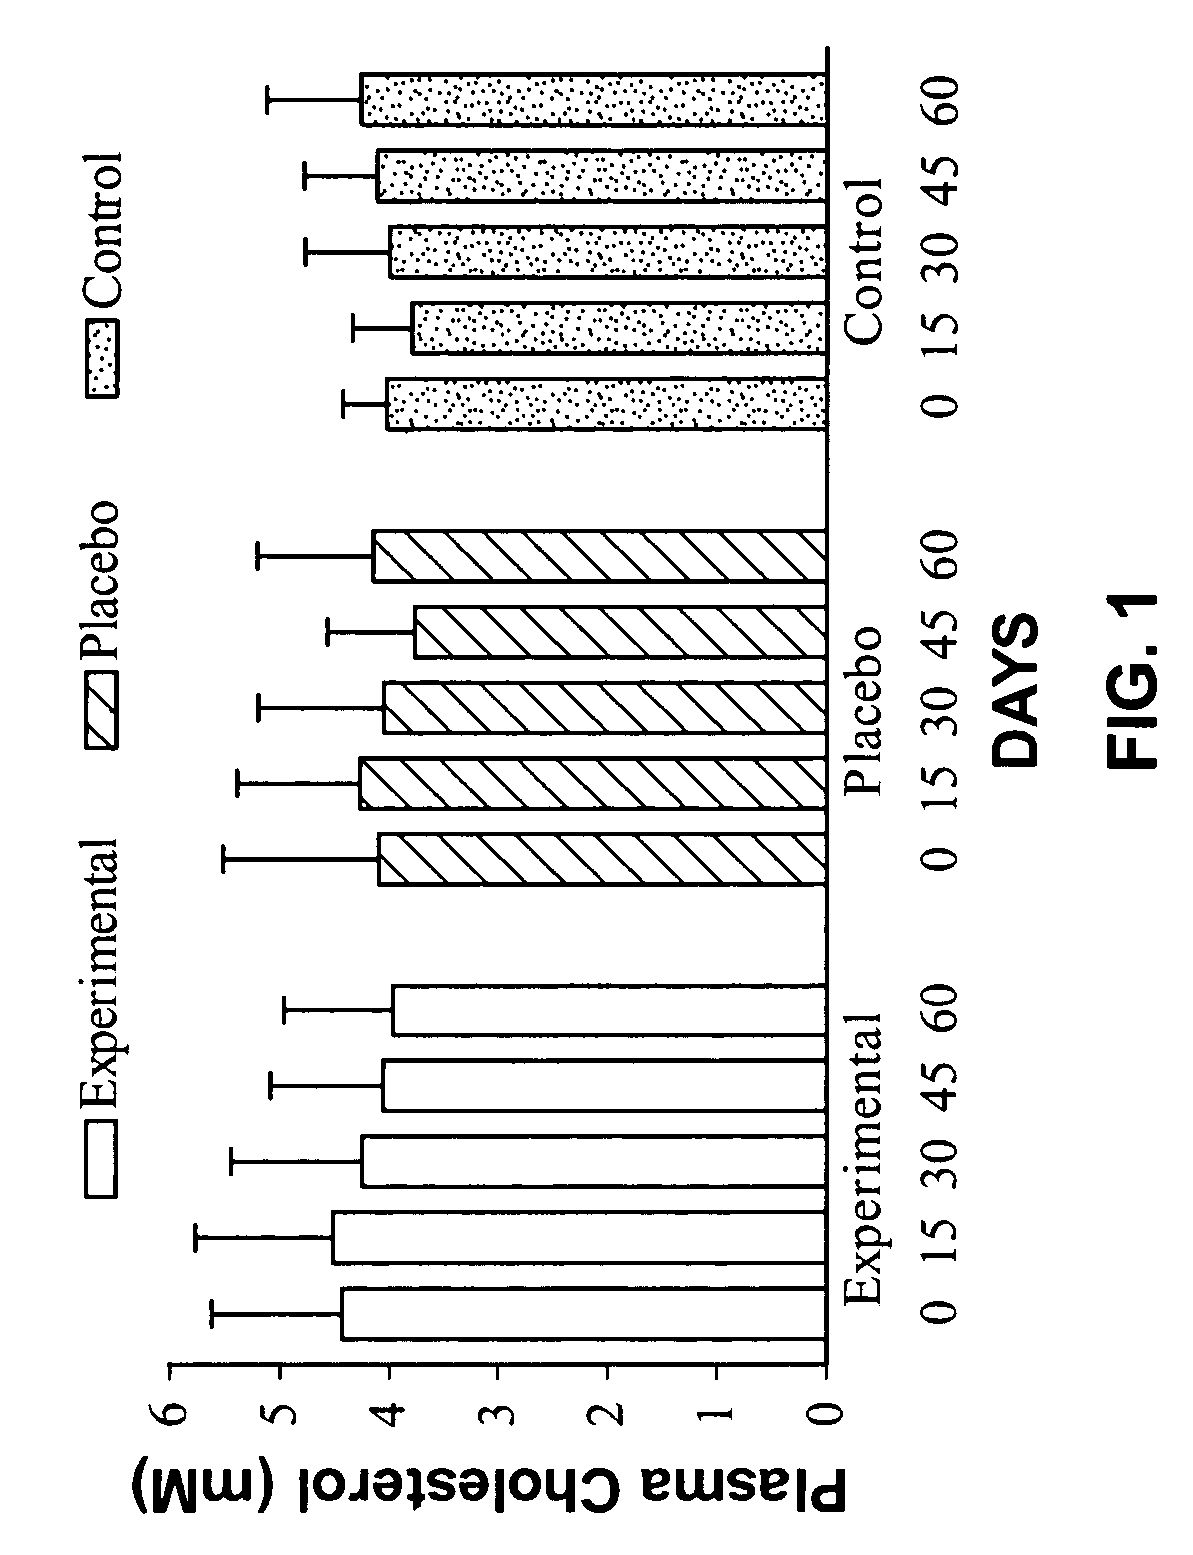 Nucleotide based medicament and method of use for treatment of conditions in humans